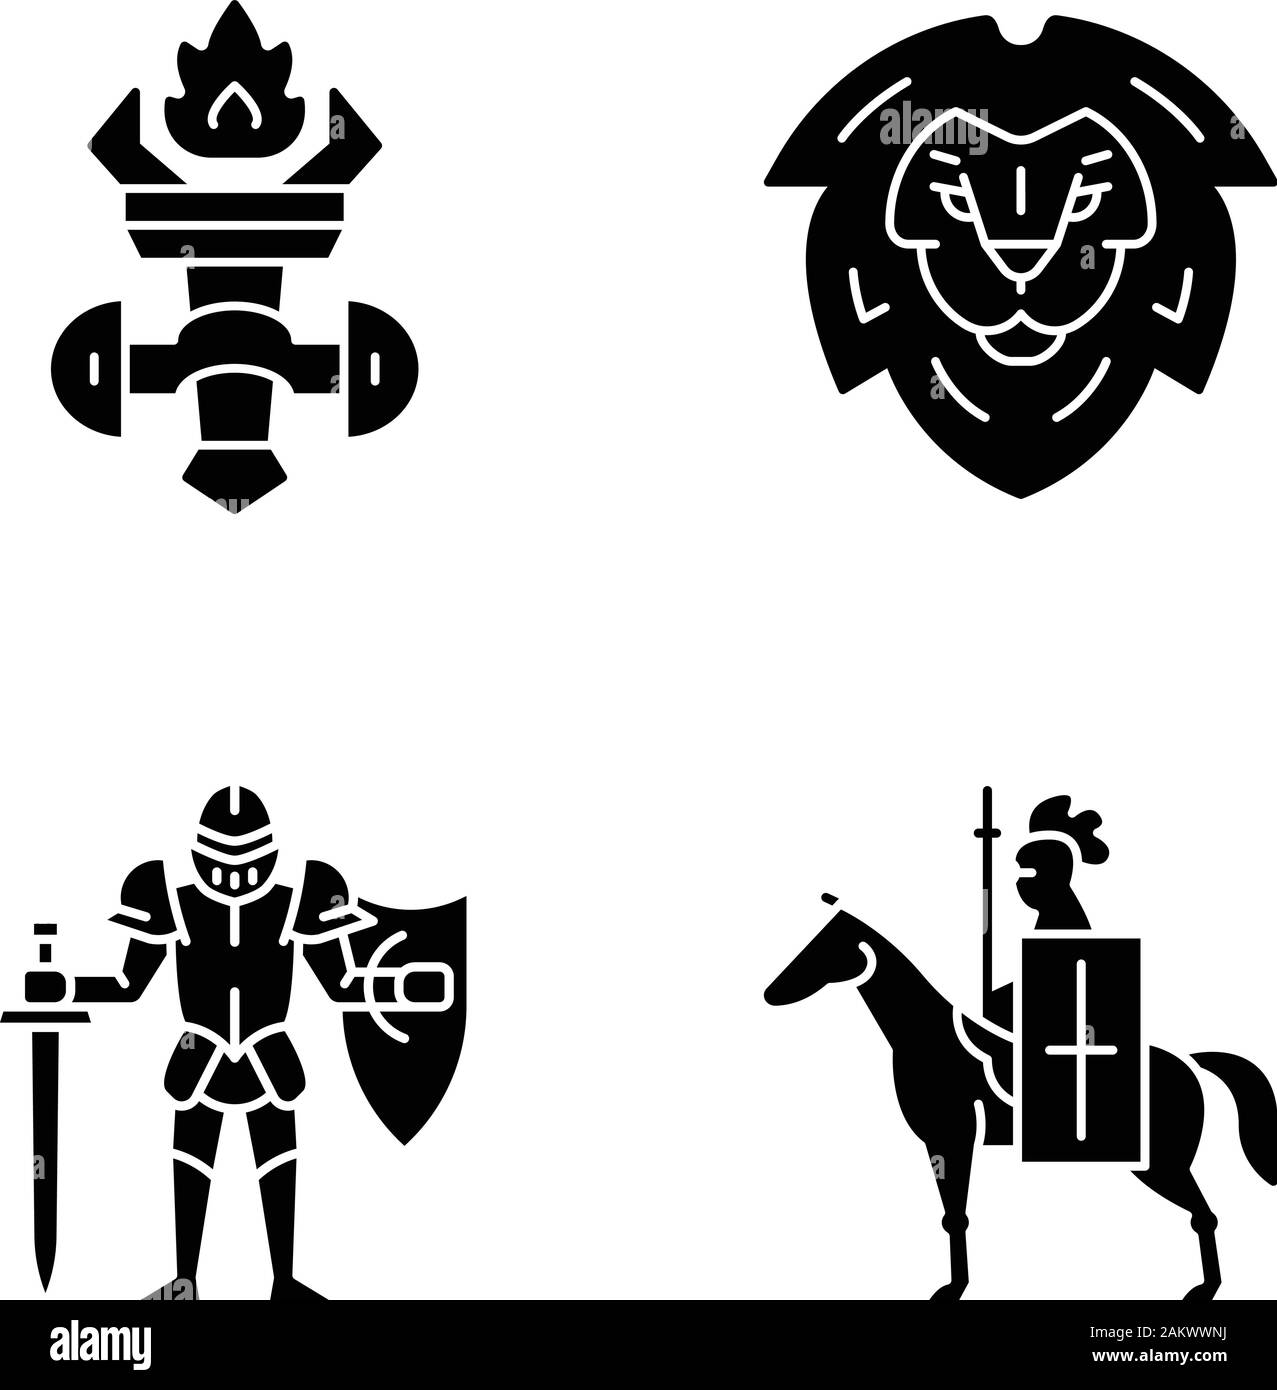 Medieval glyph icons set. Burning torch, lion head shield, knight in full armor, horse knight with flag and lance.   Silhouette symbols. Vector isolat Stock Vector